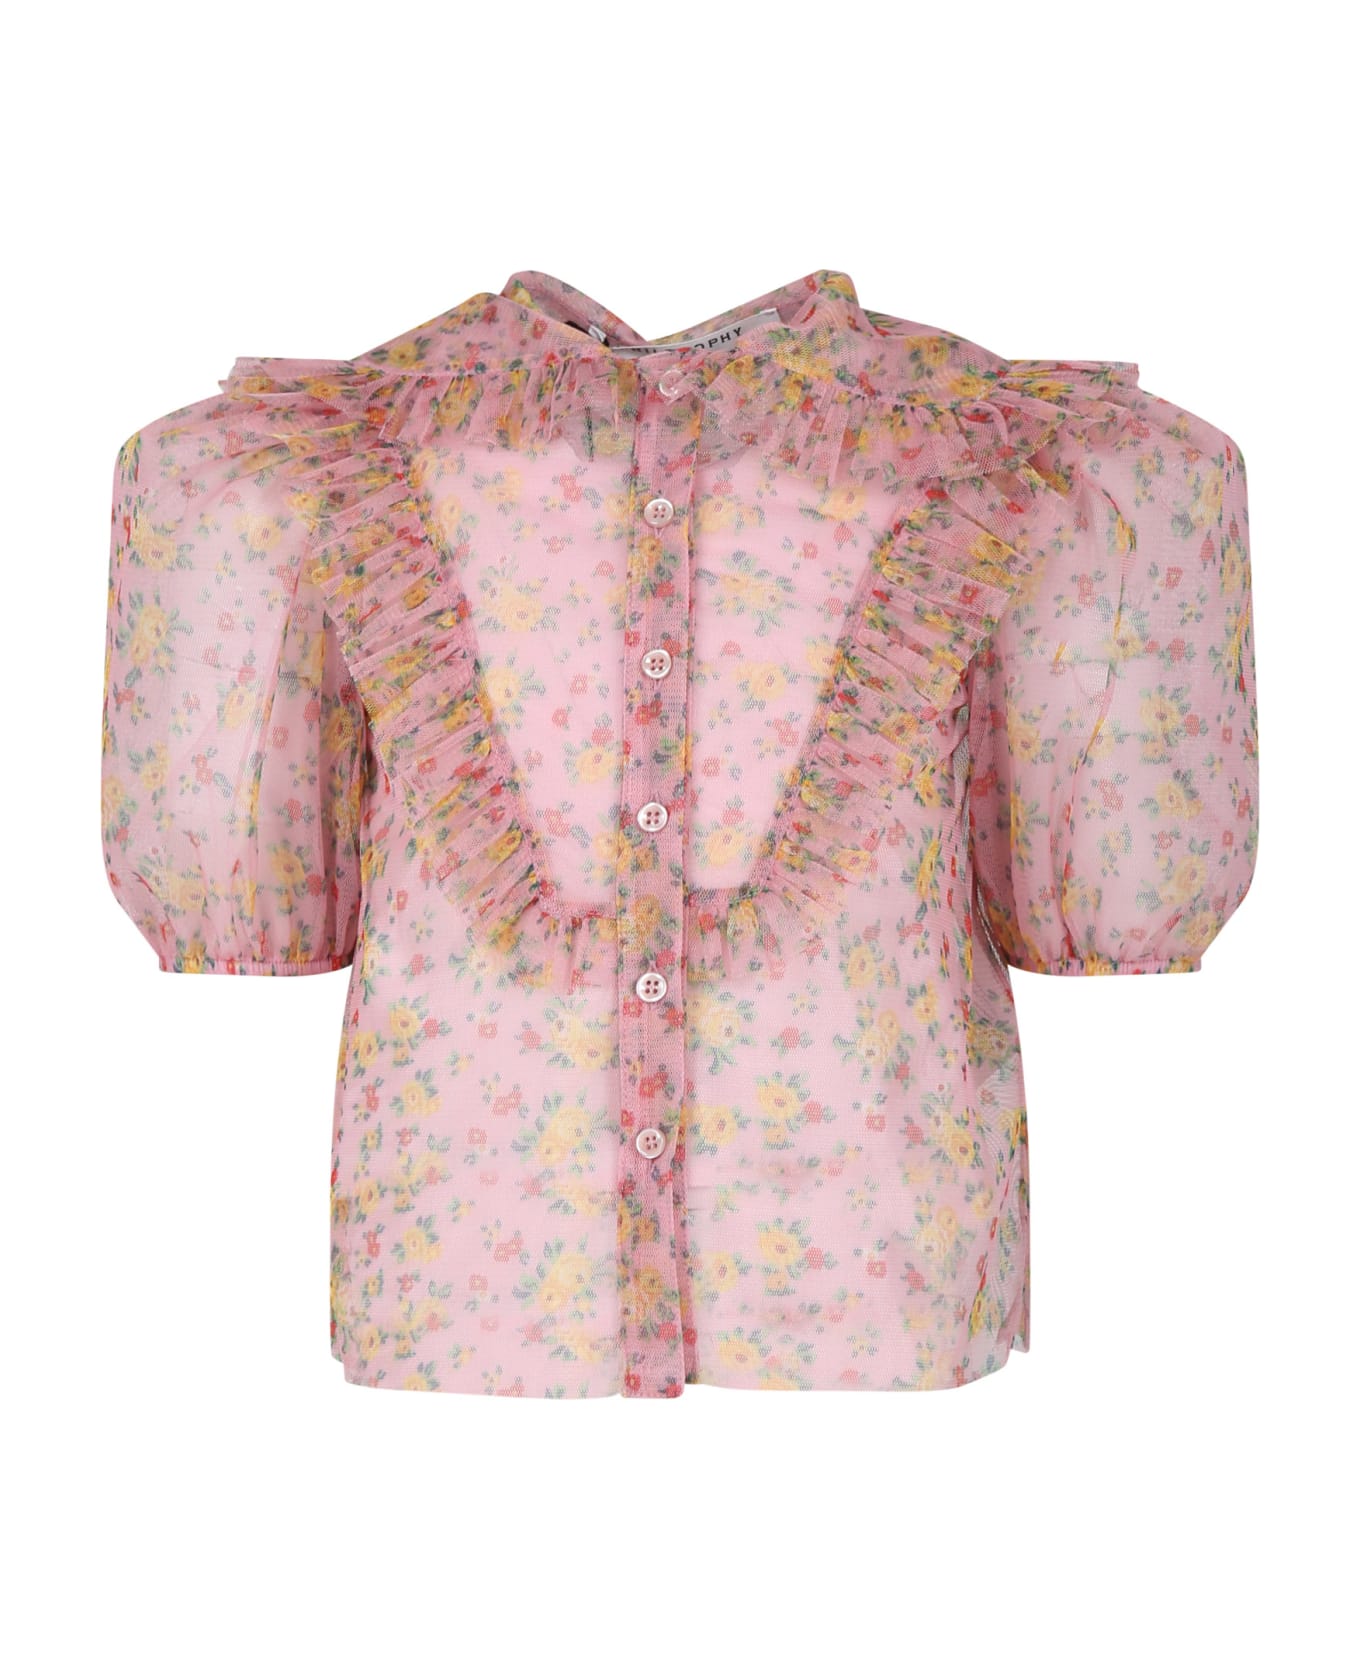 Philosophy di Lorenzo Serafini Kids Pink Shirt For Girl With Floral Print - Multicolor